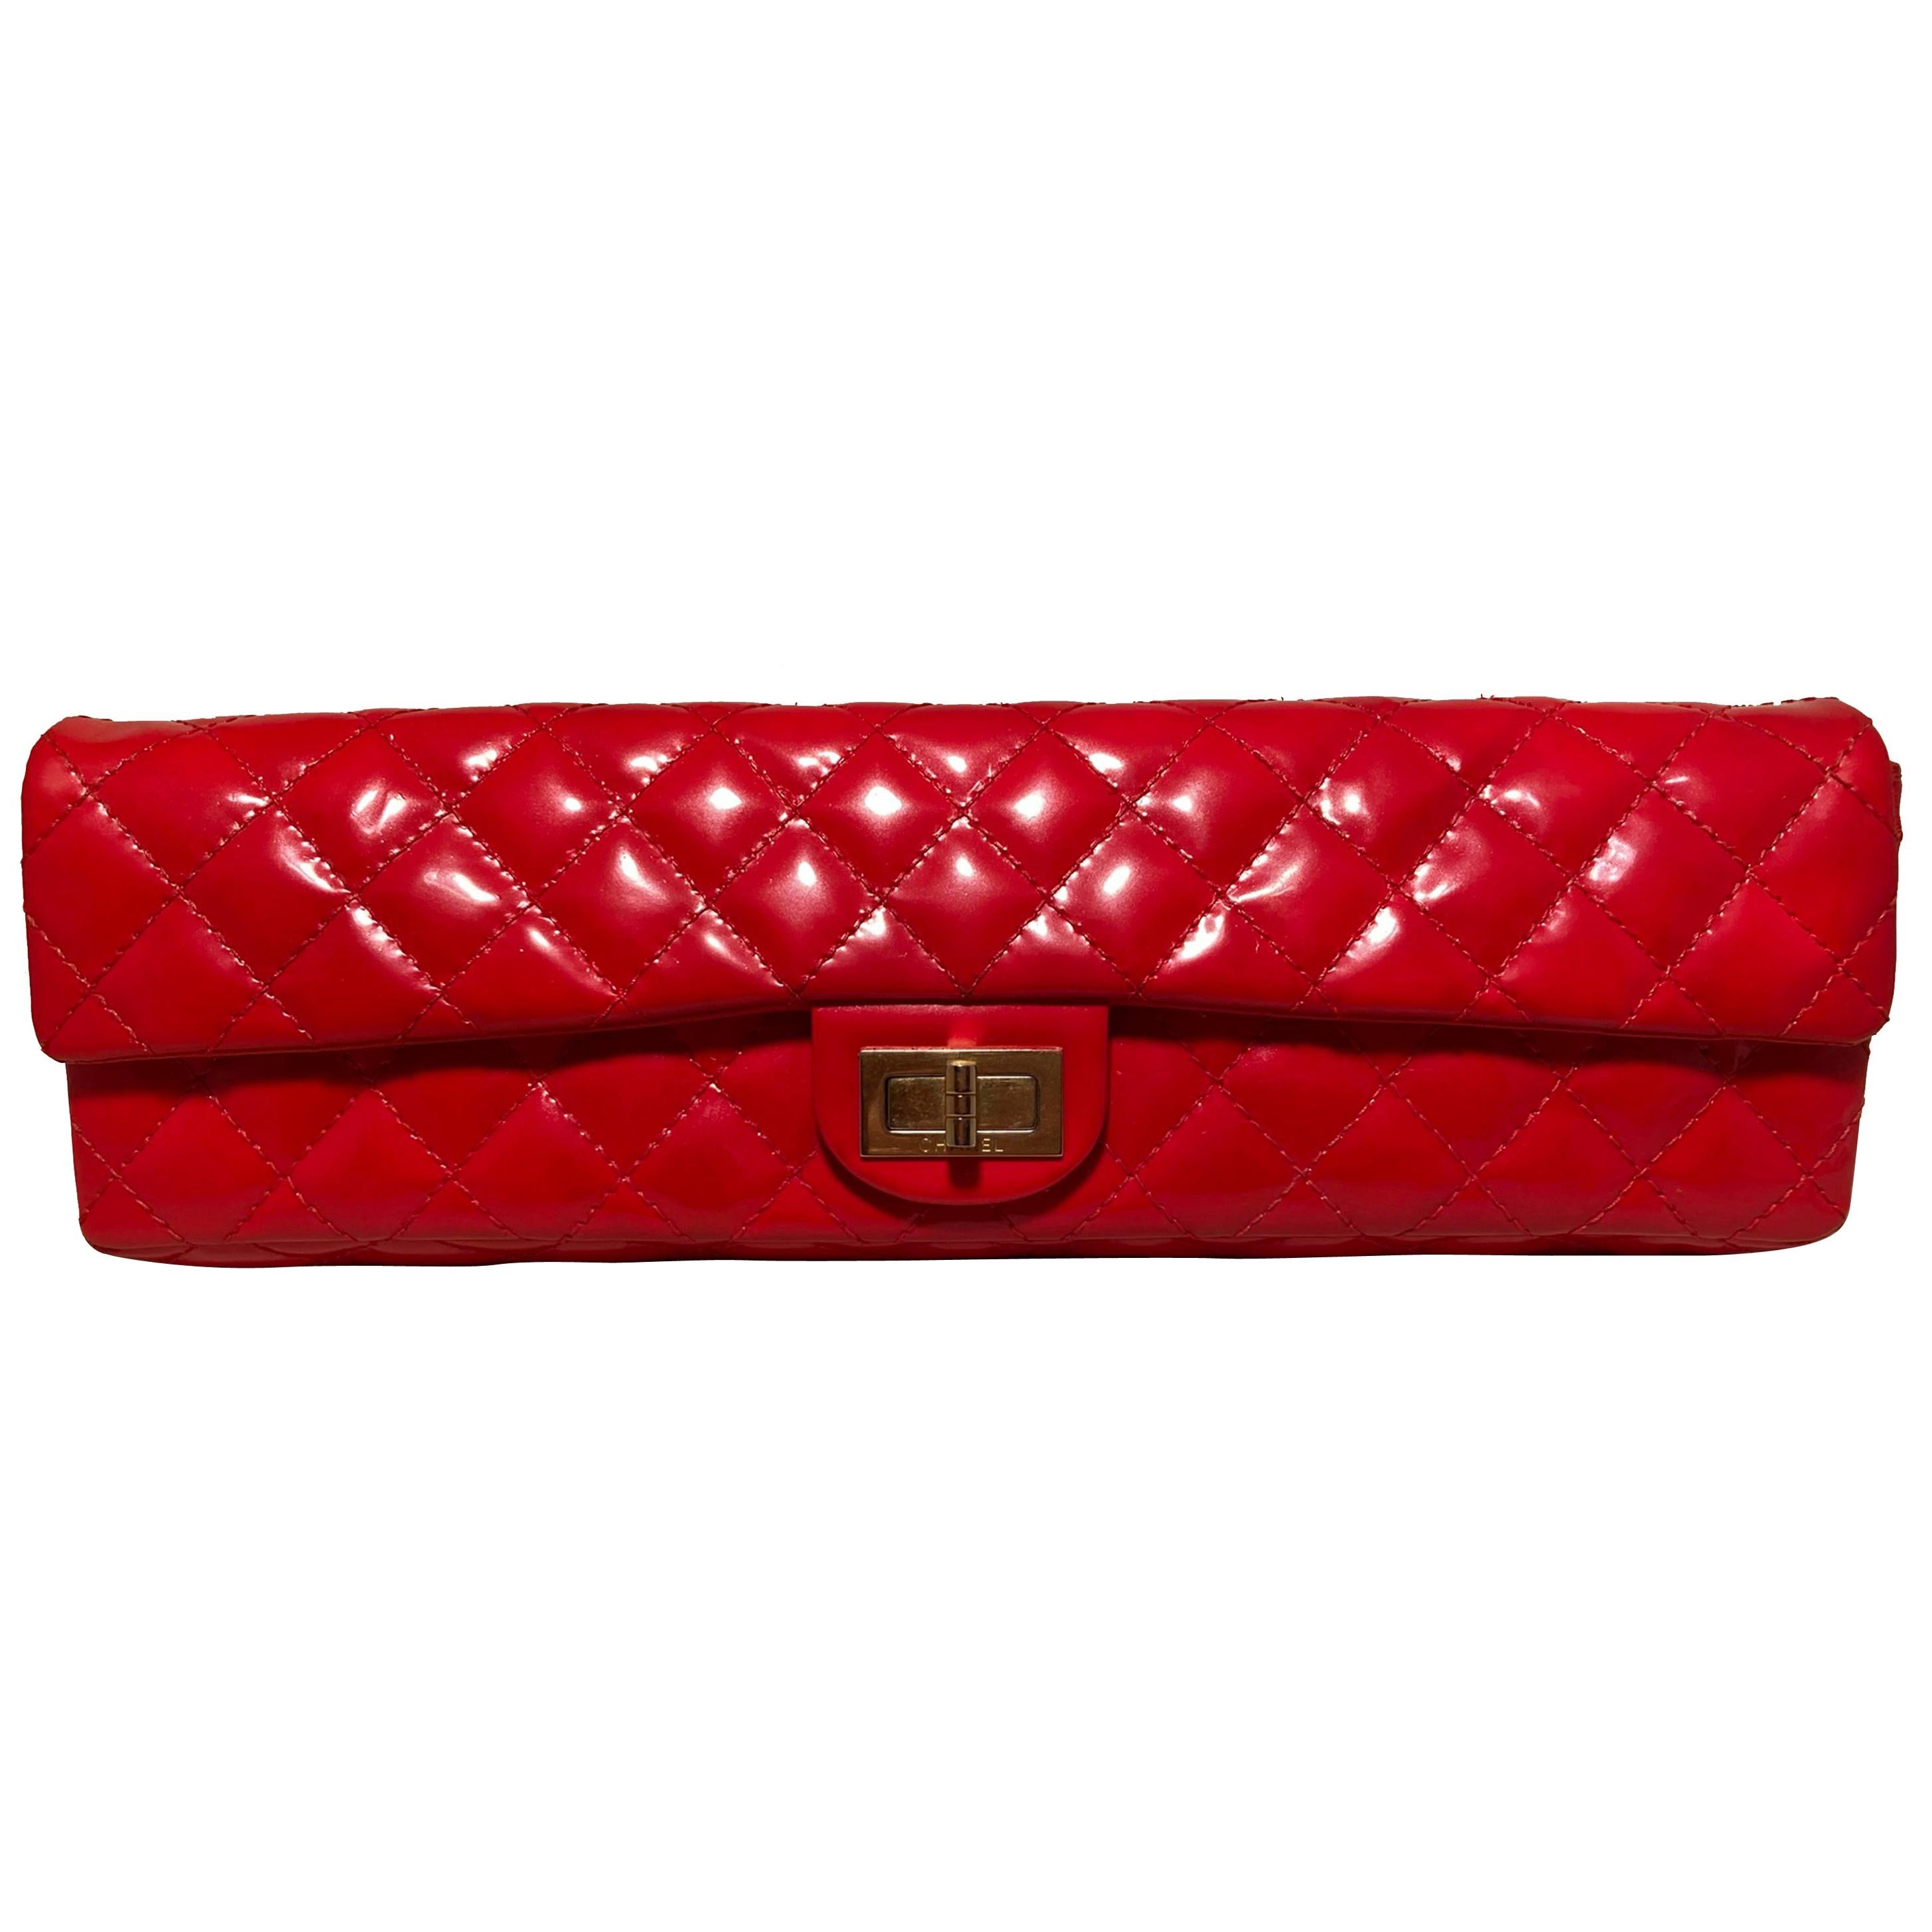 Chanel Red 2.55 Reissue Quilted Patent Leather East/West Clutch